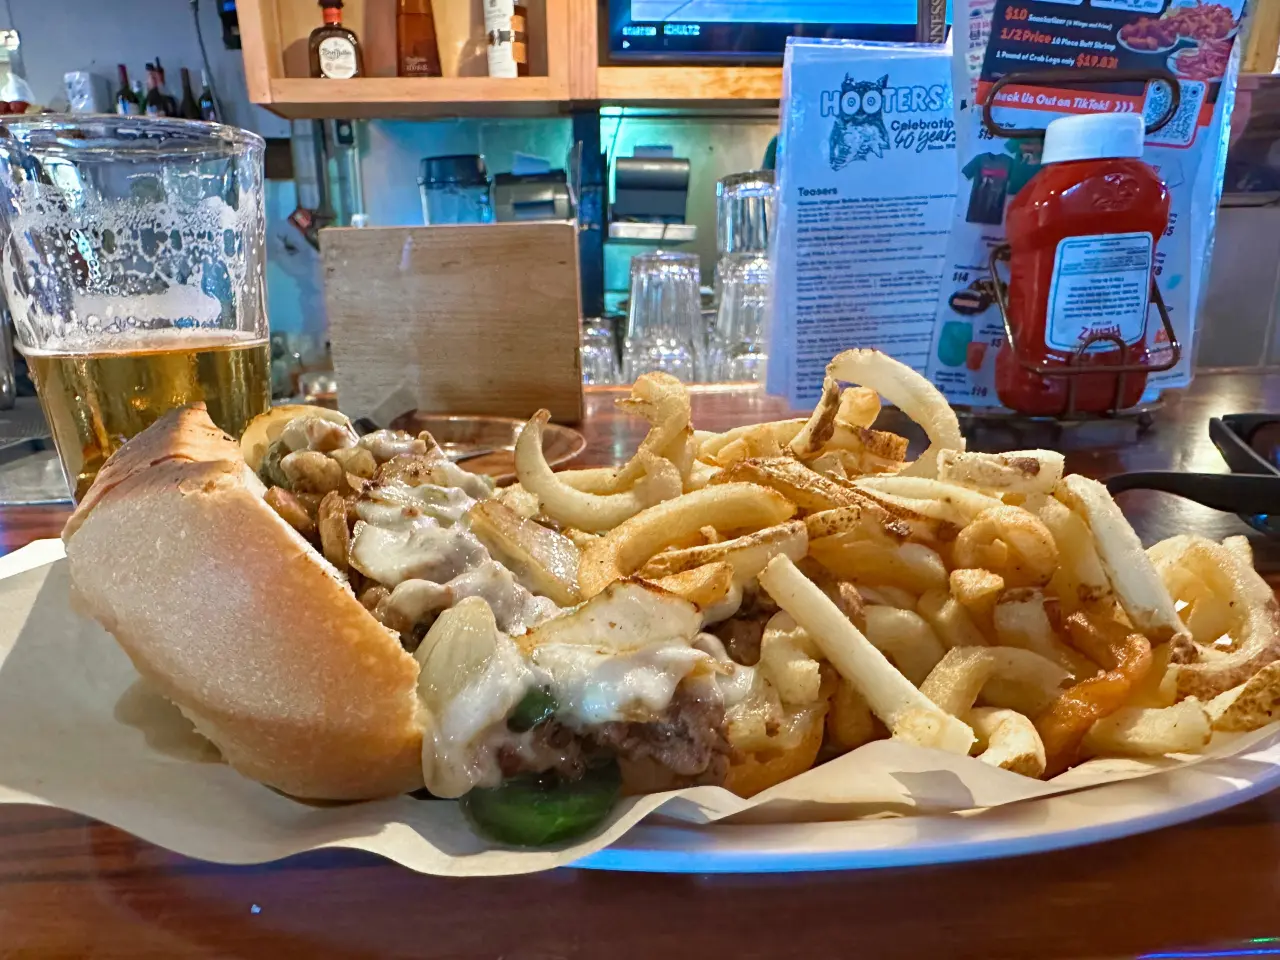 Photo of a philly steak, fries, and beer